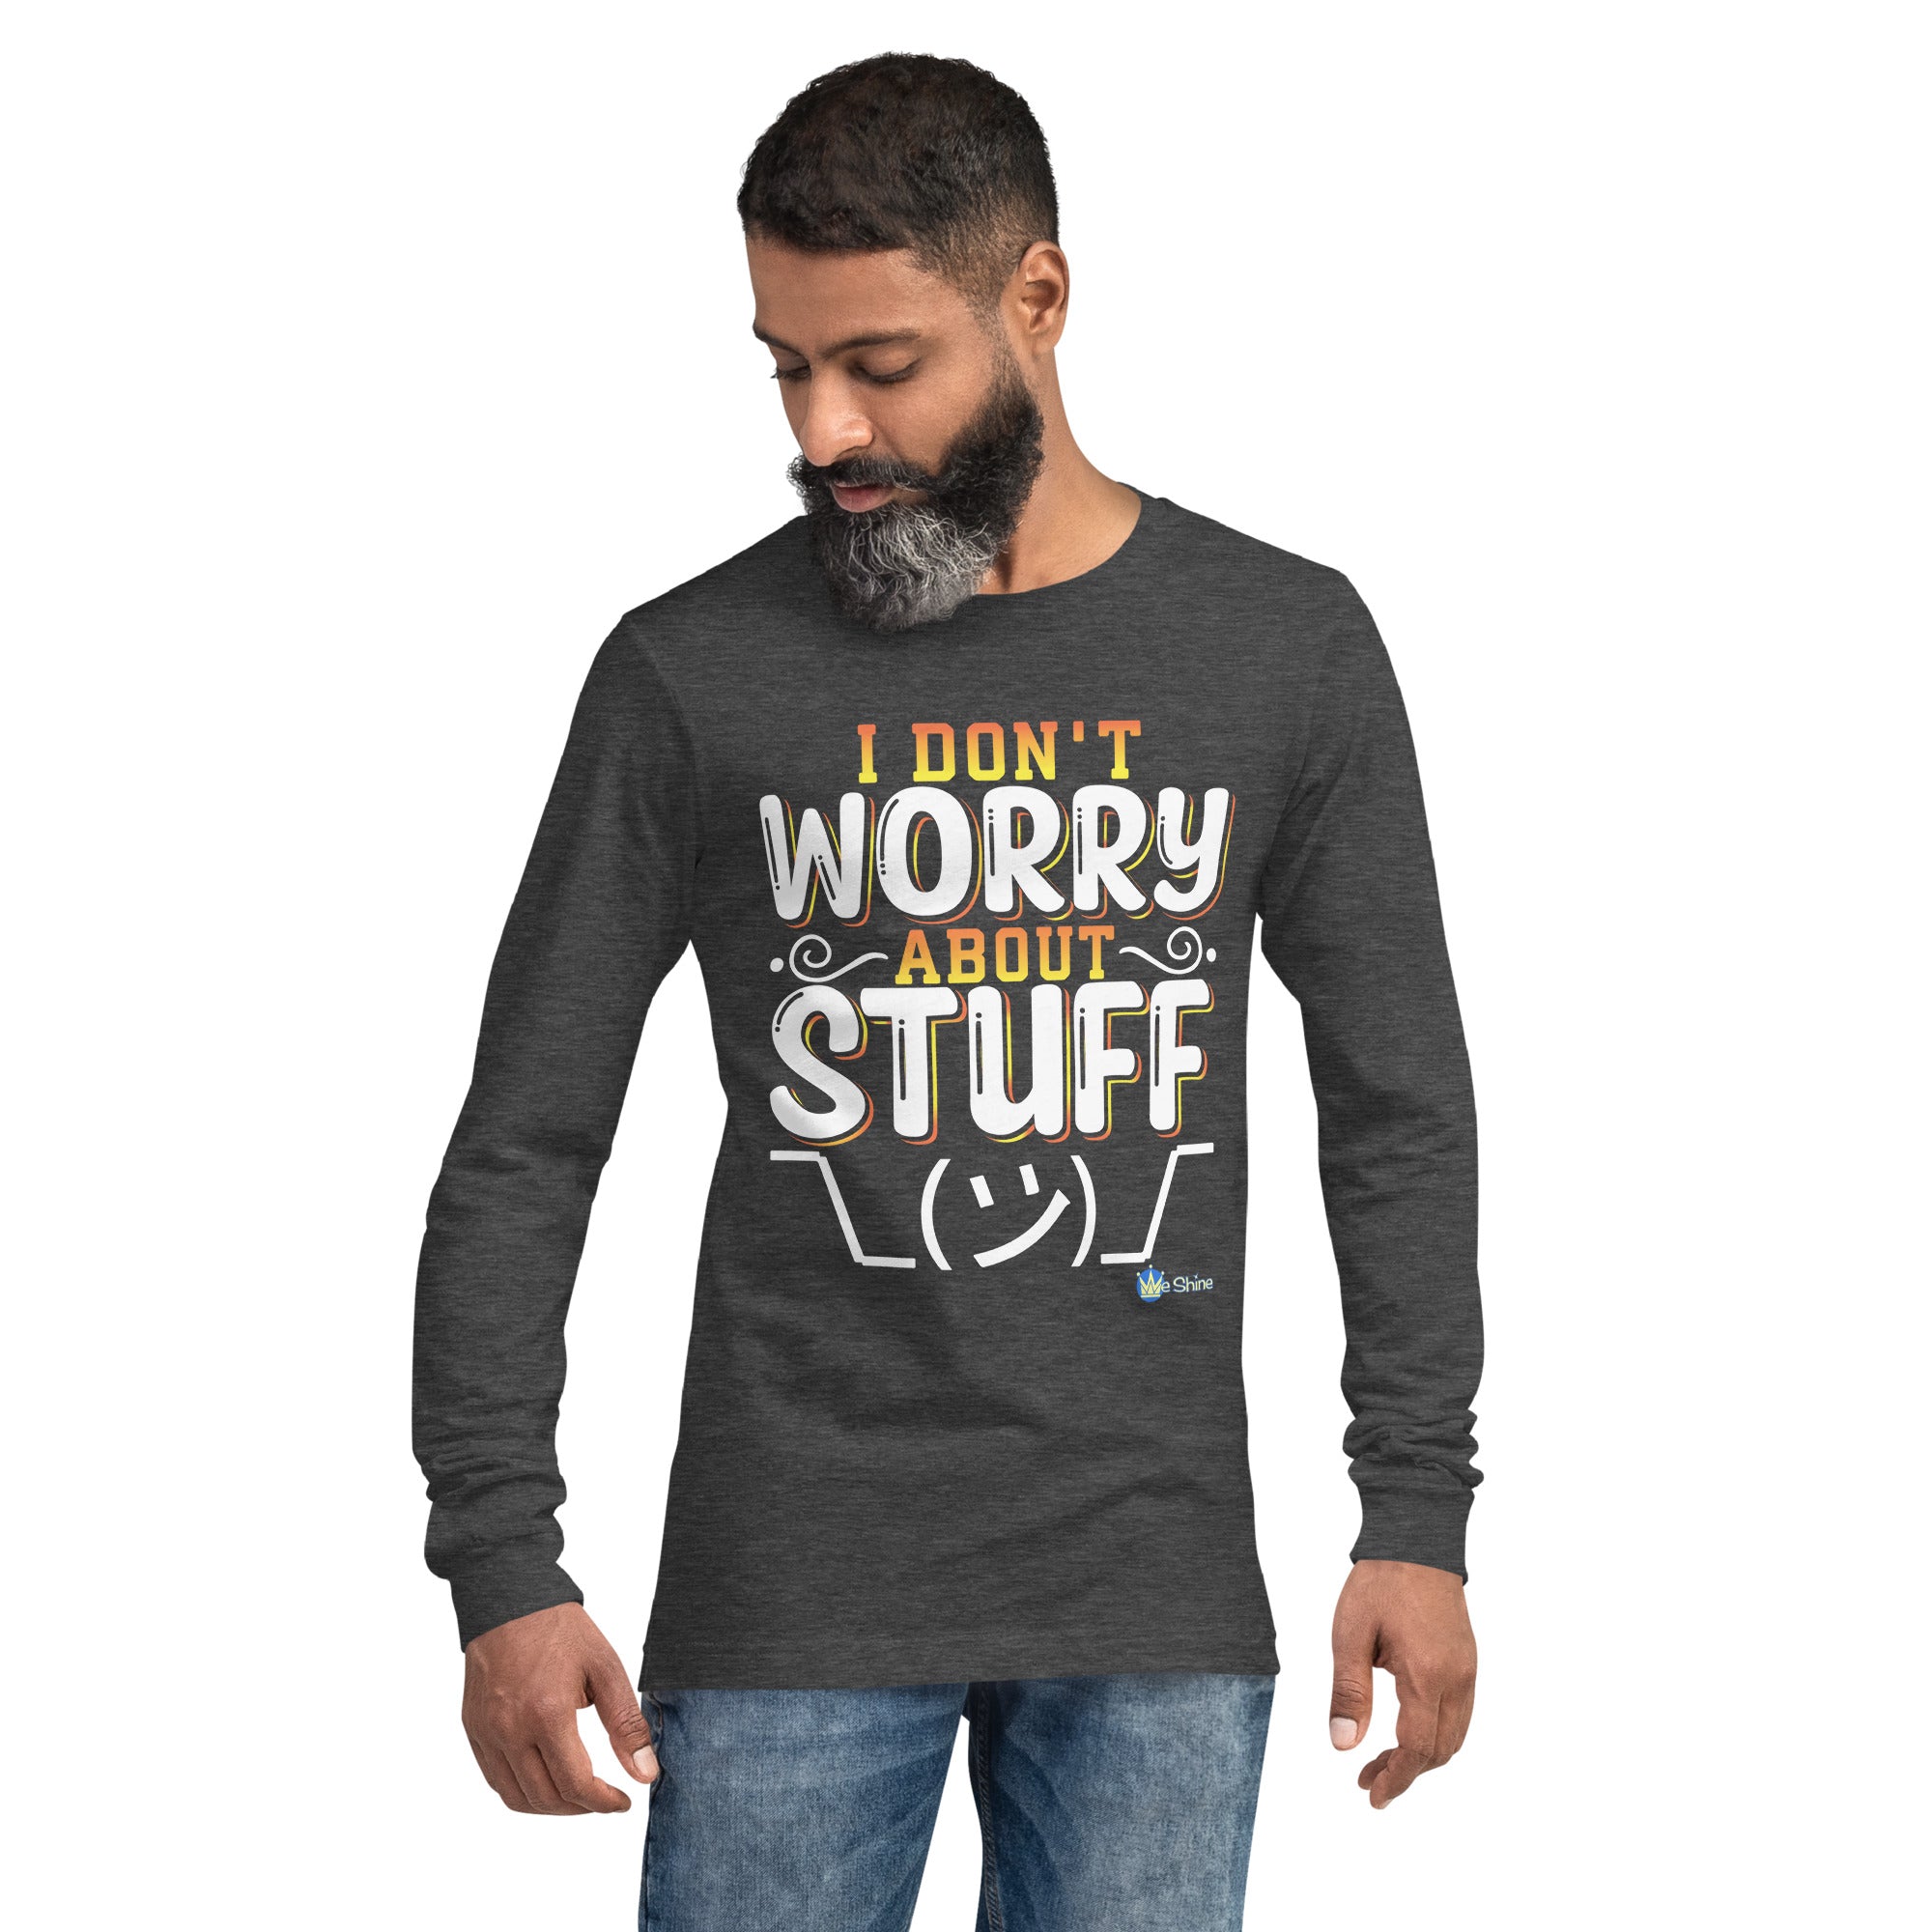 I Don't Worry About Stuff - Adult Long Sleeve Tee